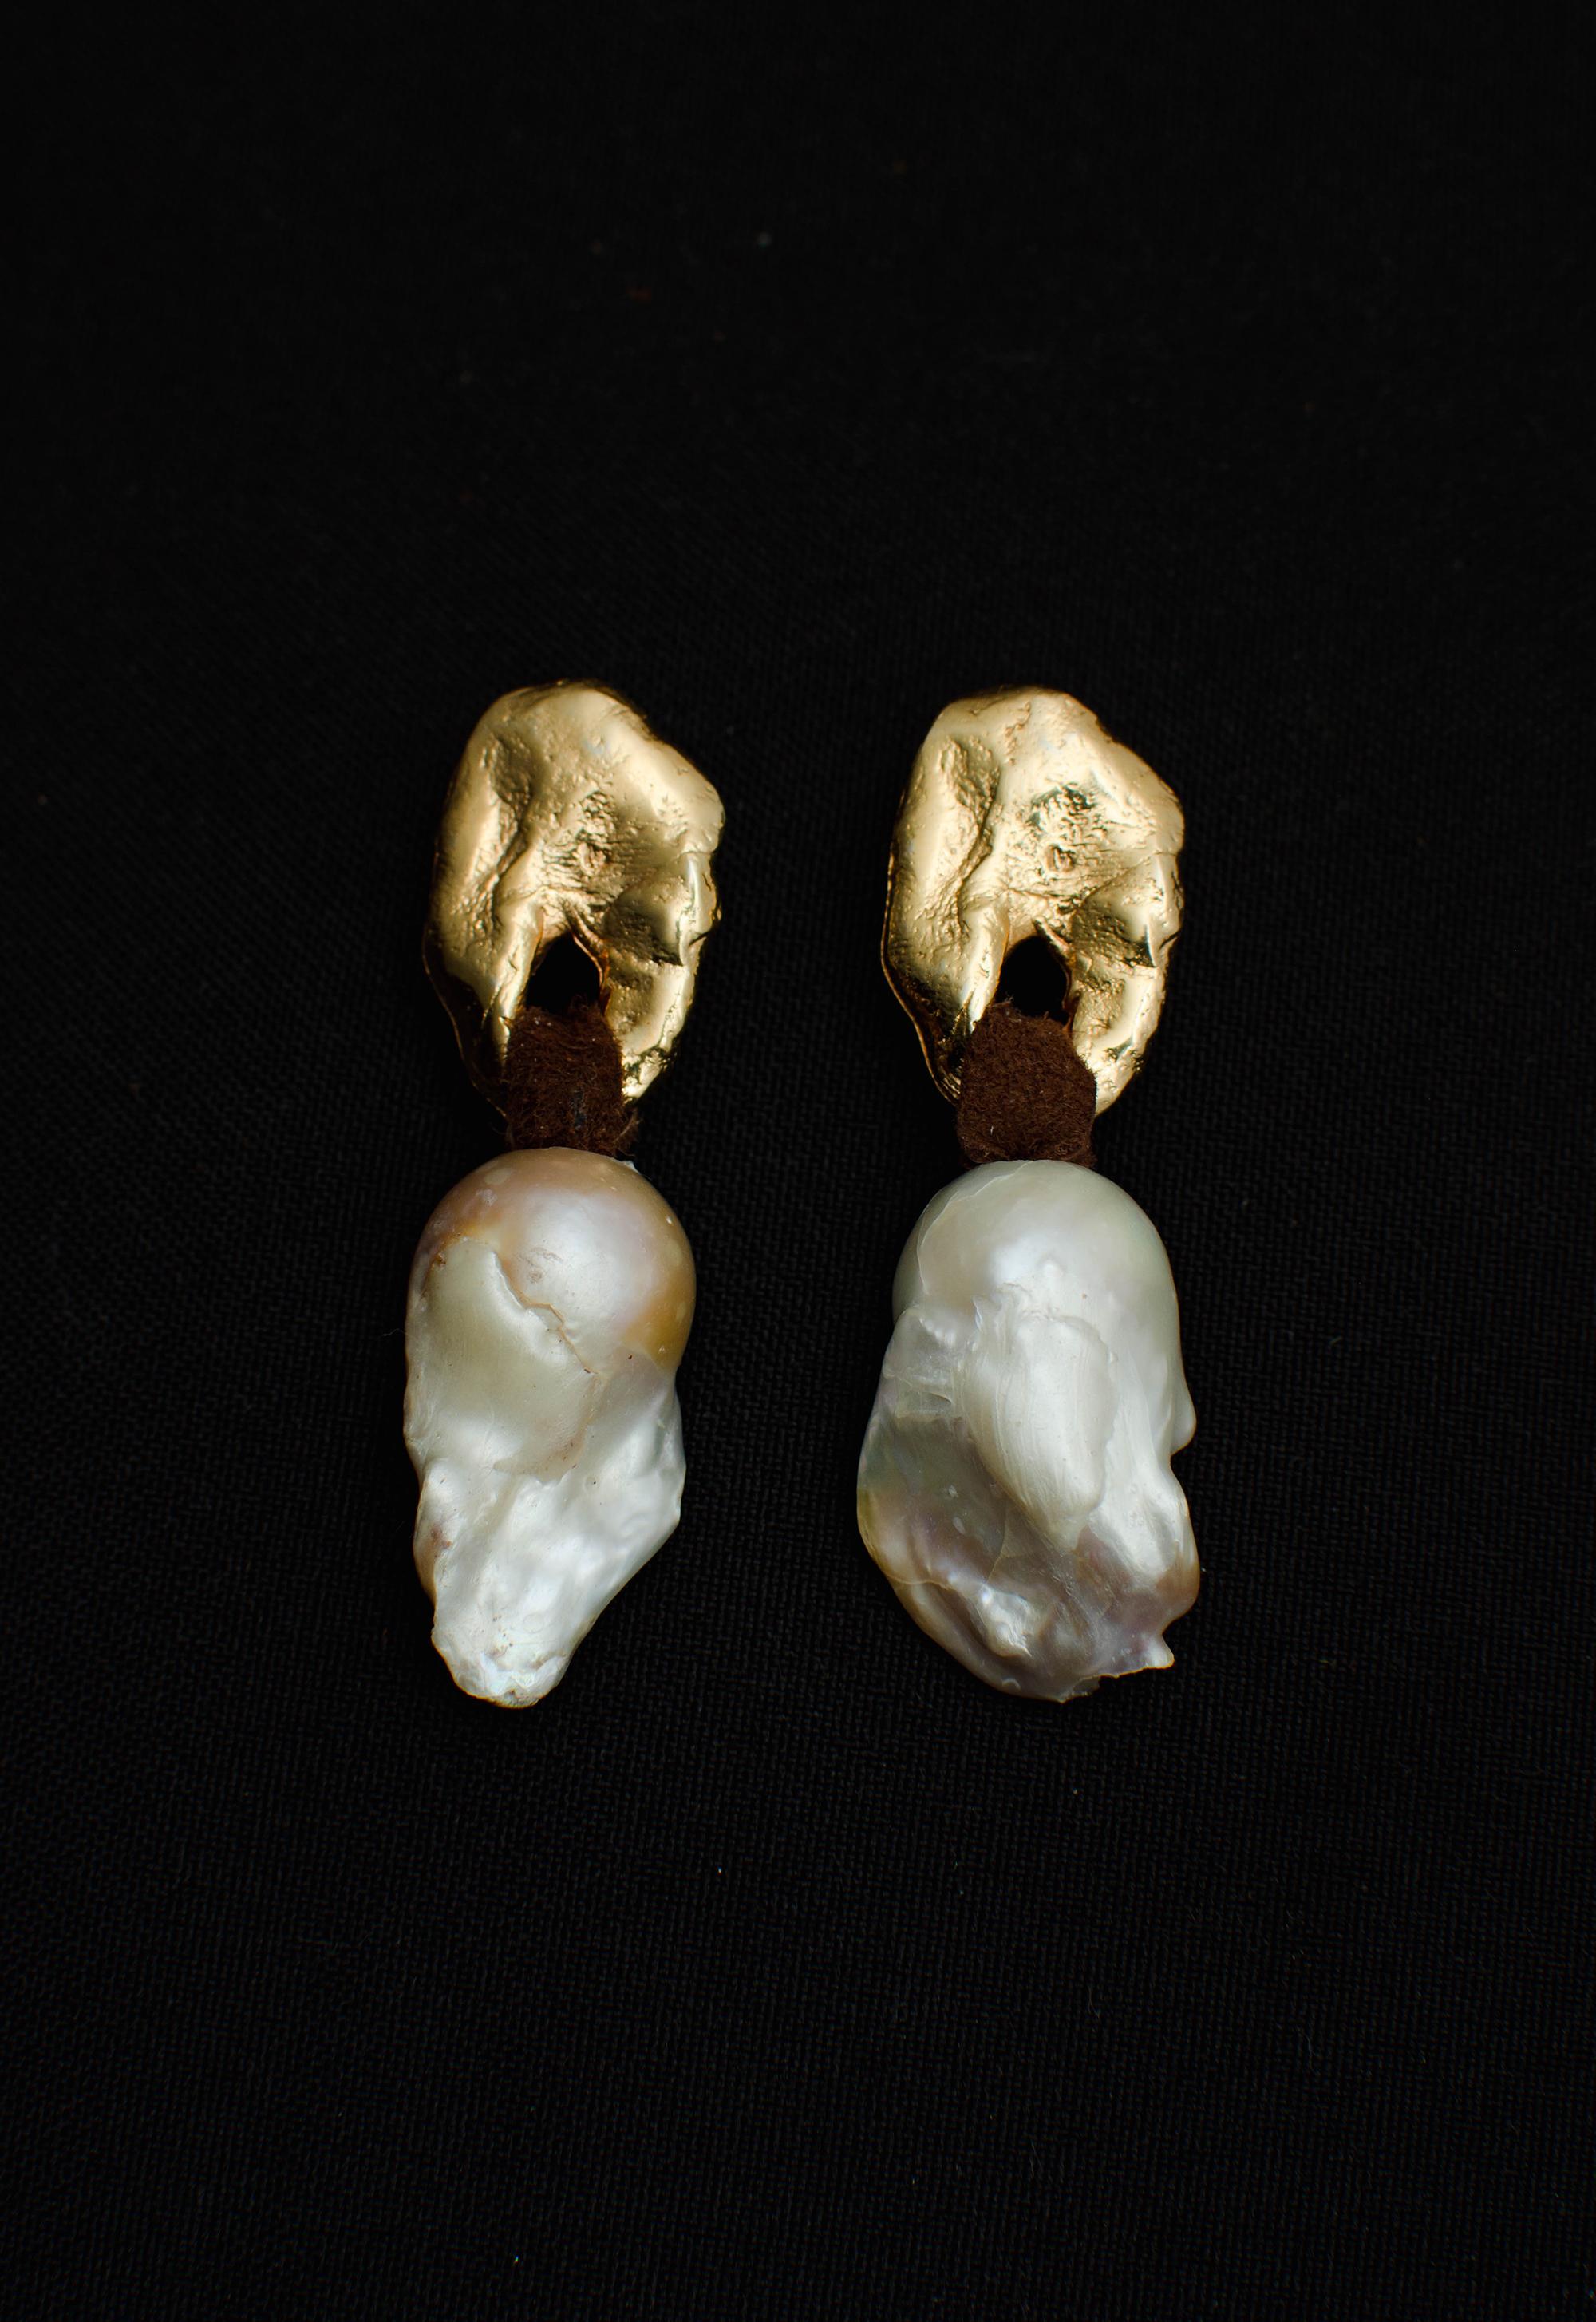 These pieces were designed, hand-carved, and then cast from our workshop in Uruguay. Silver used in this manufacturing process is fully recycled       

Details
Baroque Pearl / Leather / 24 k Gold Plated Sterling Silver 
4 cm long 
Free Shipping